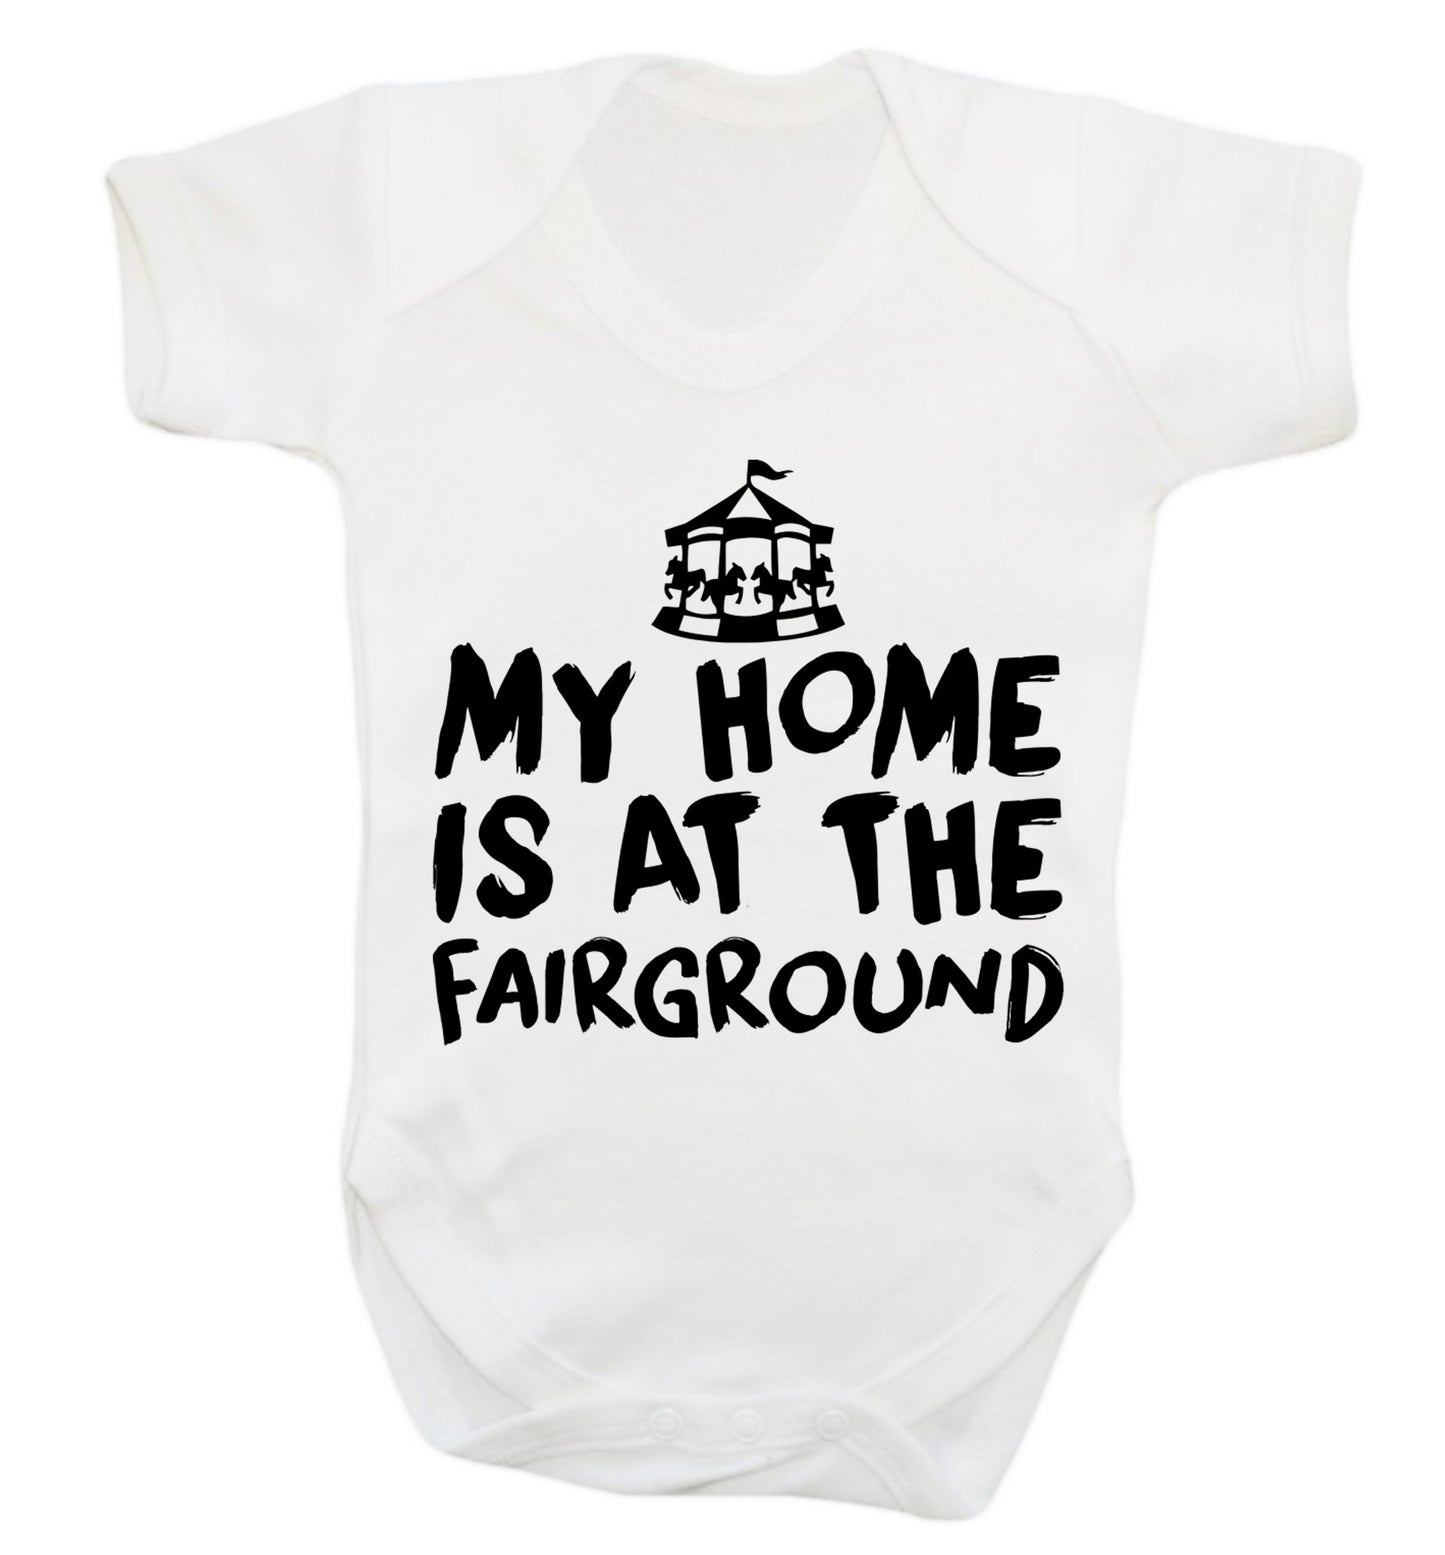 My home is at the fairground Baby Vest white 18-24 months